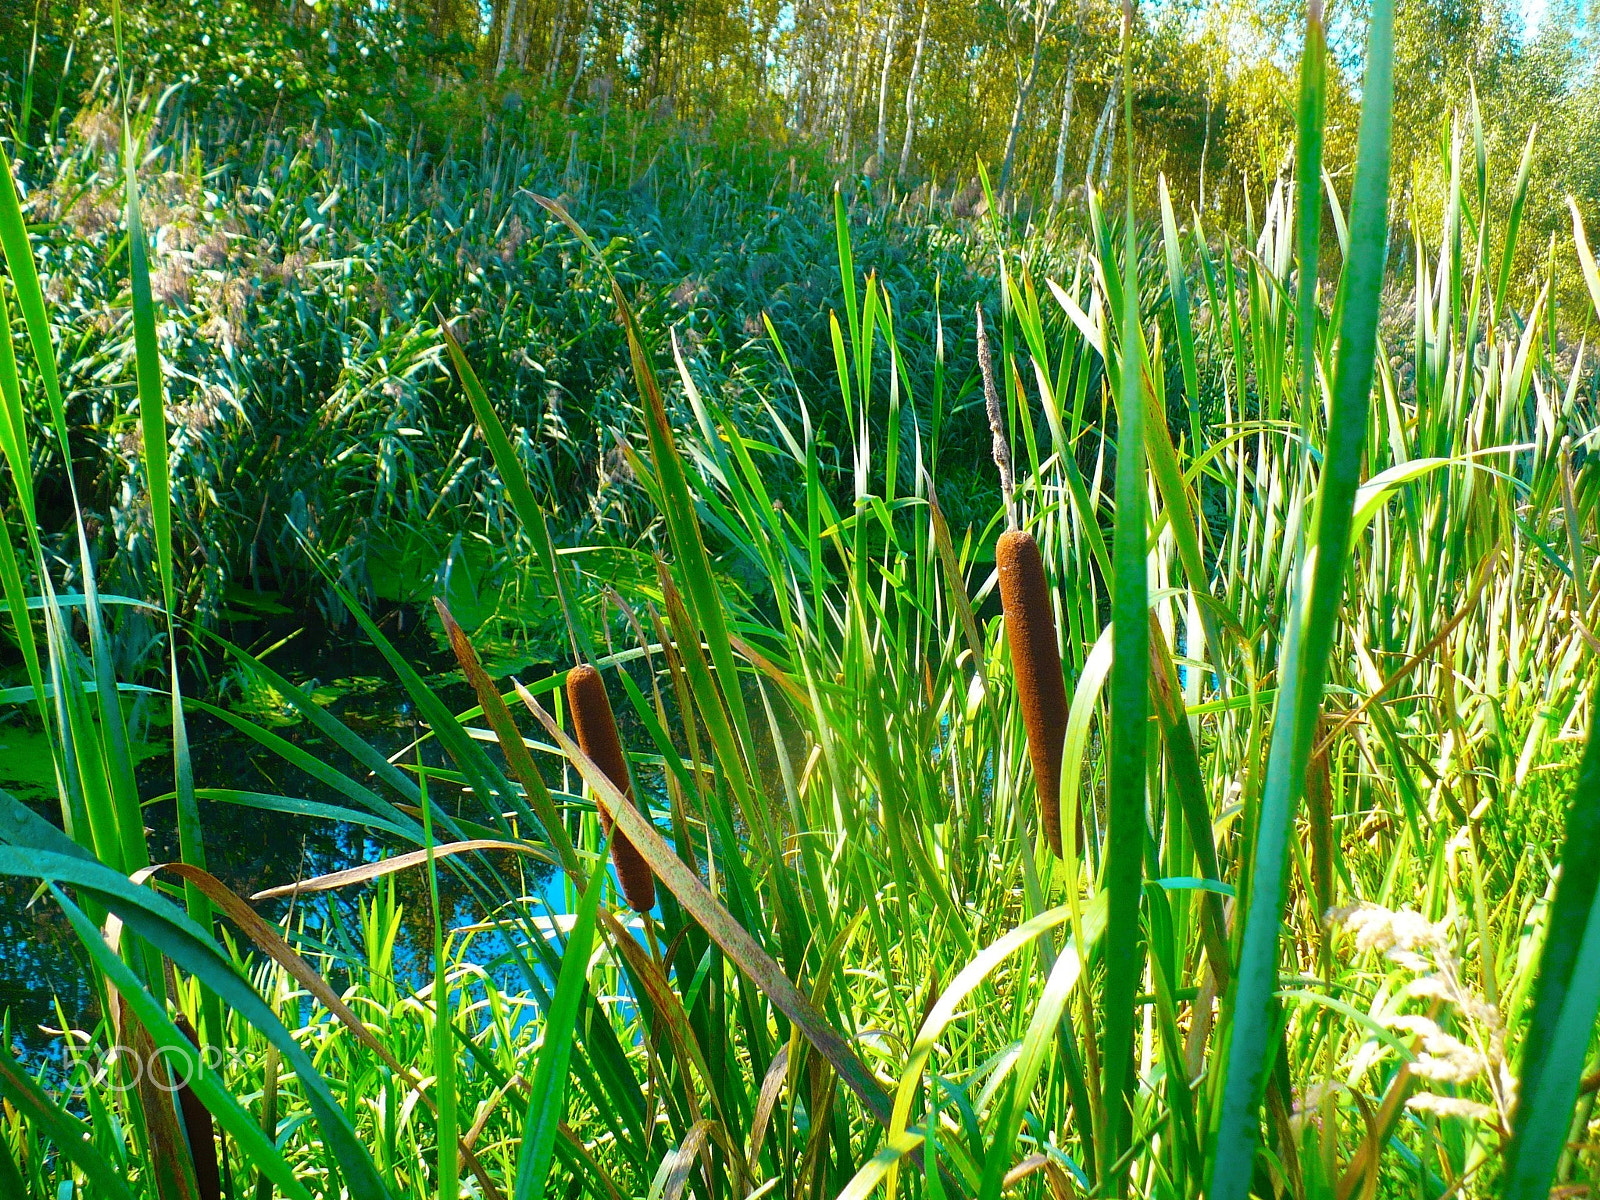 Panasonic DMC-LZ7 sample photo. The reeds by the river photography